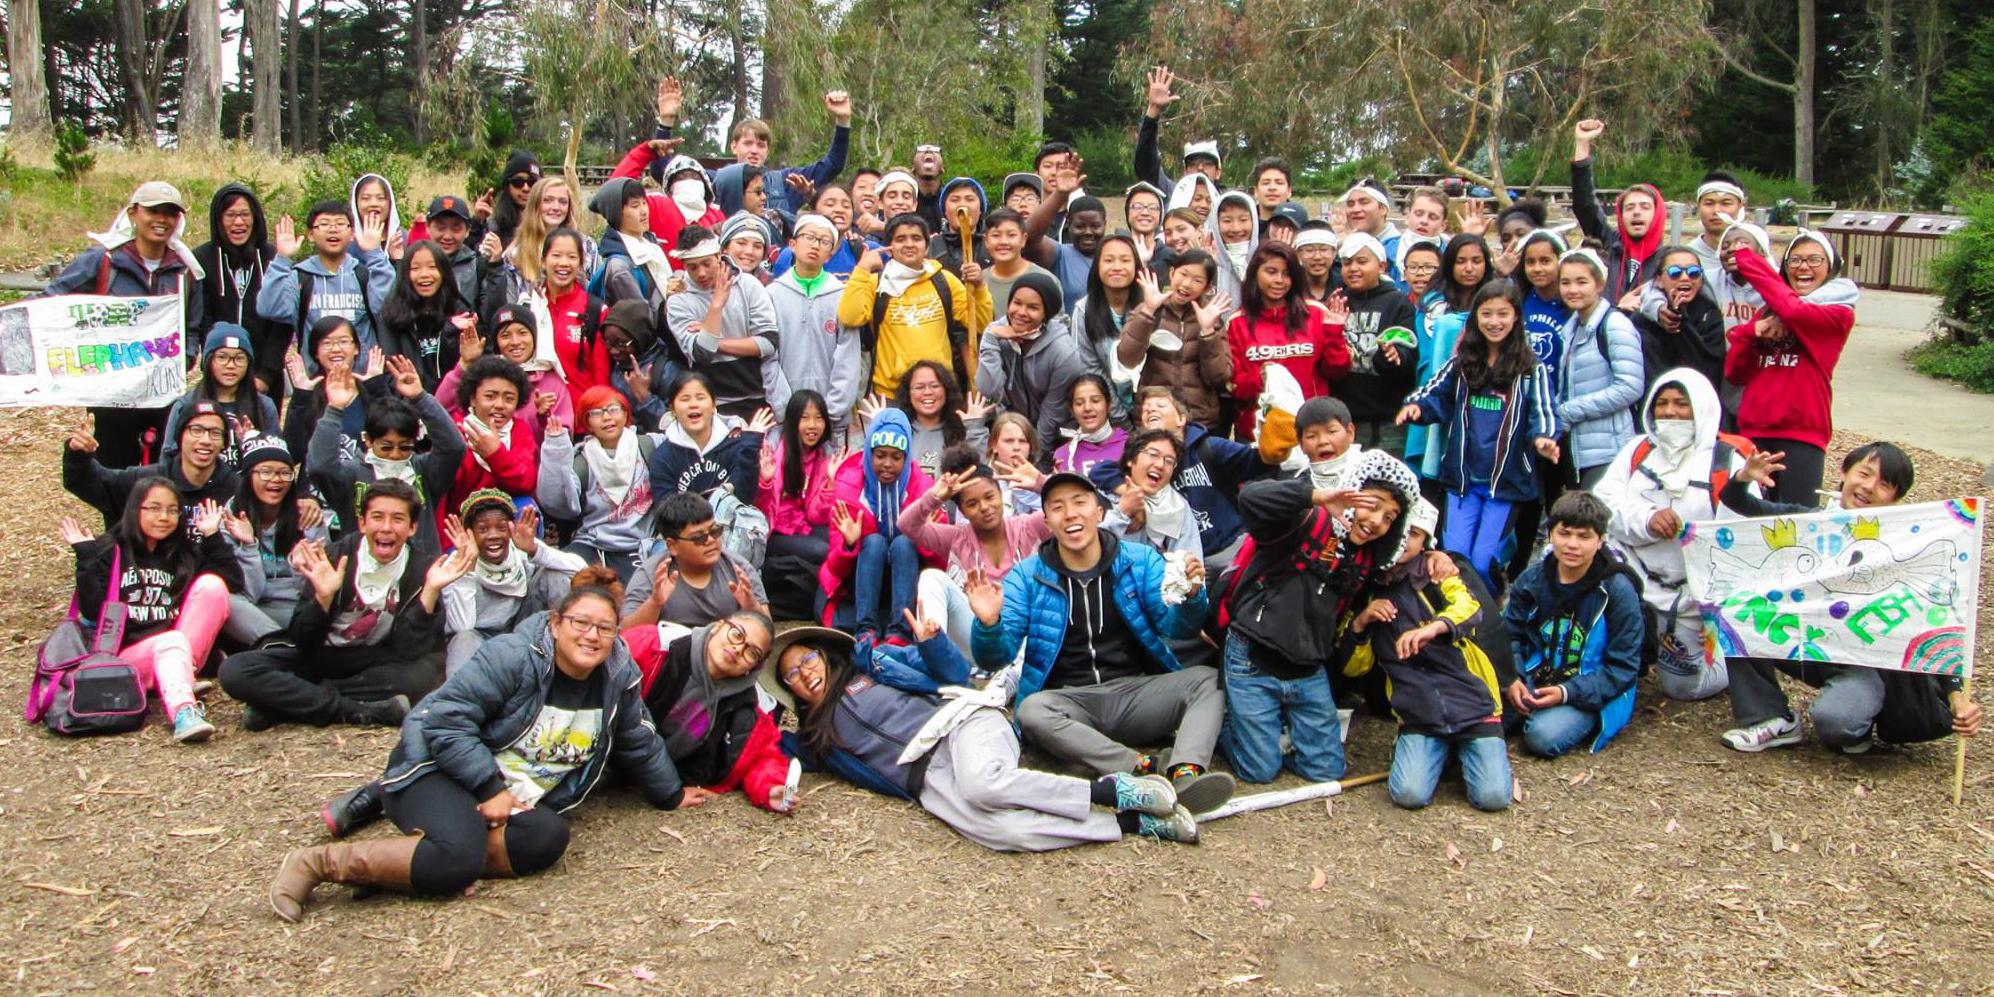 A large group of cheerful teenagers excitingly cheer at Rob Hill Campground in the Presidio of San Francisco